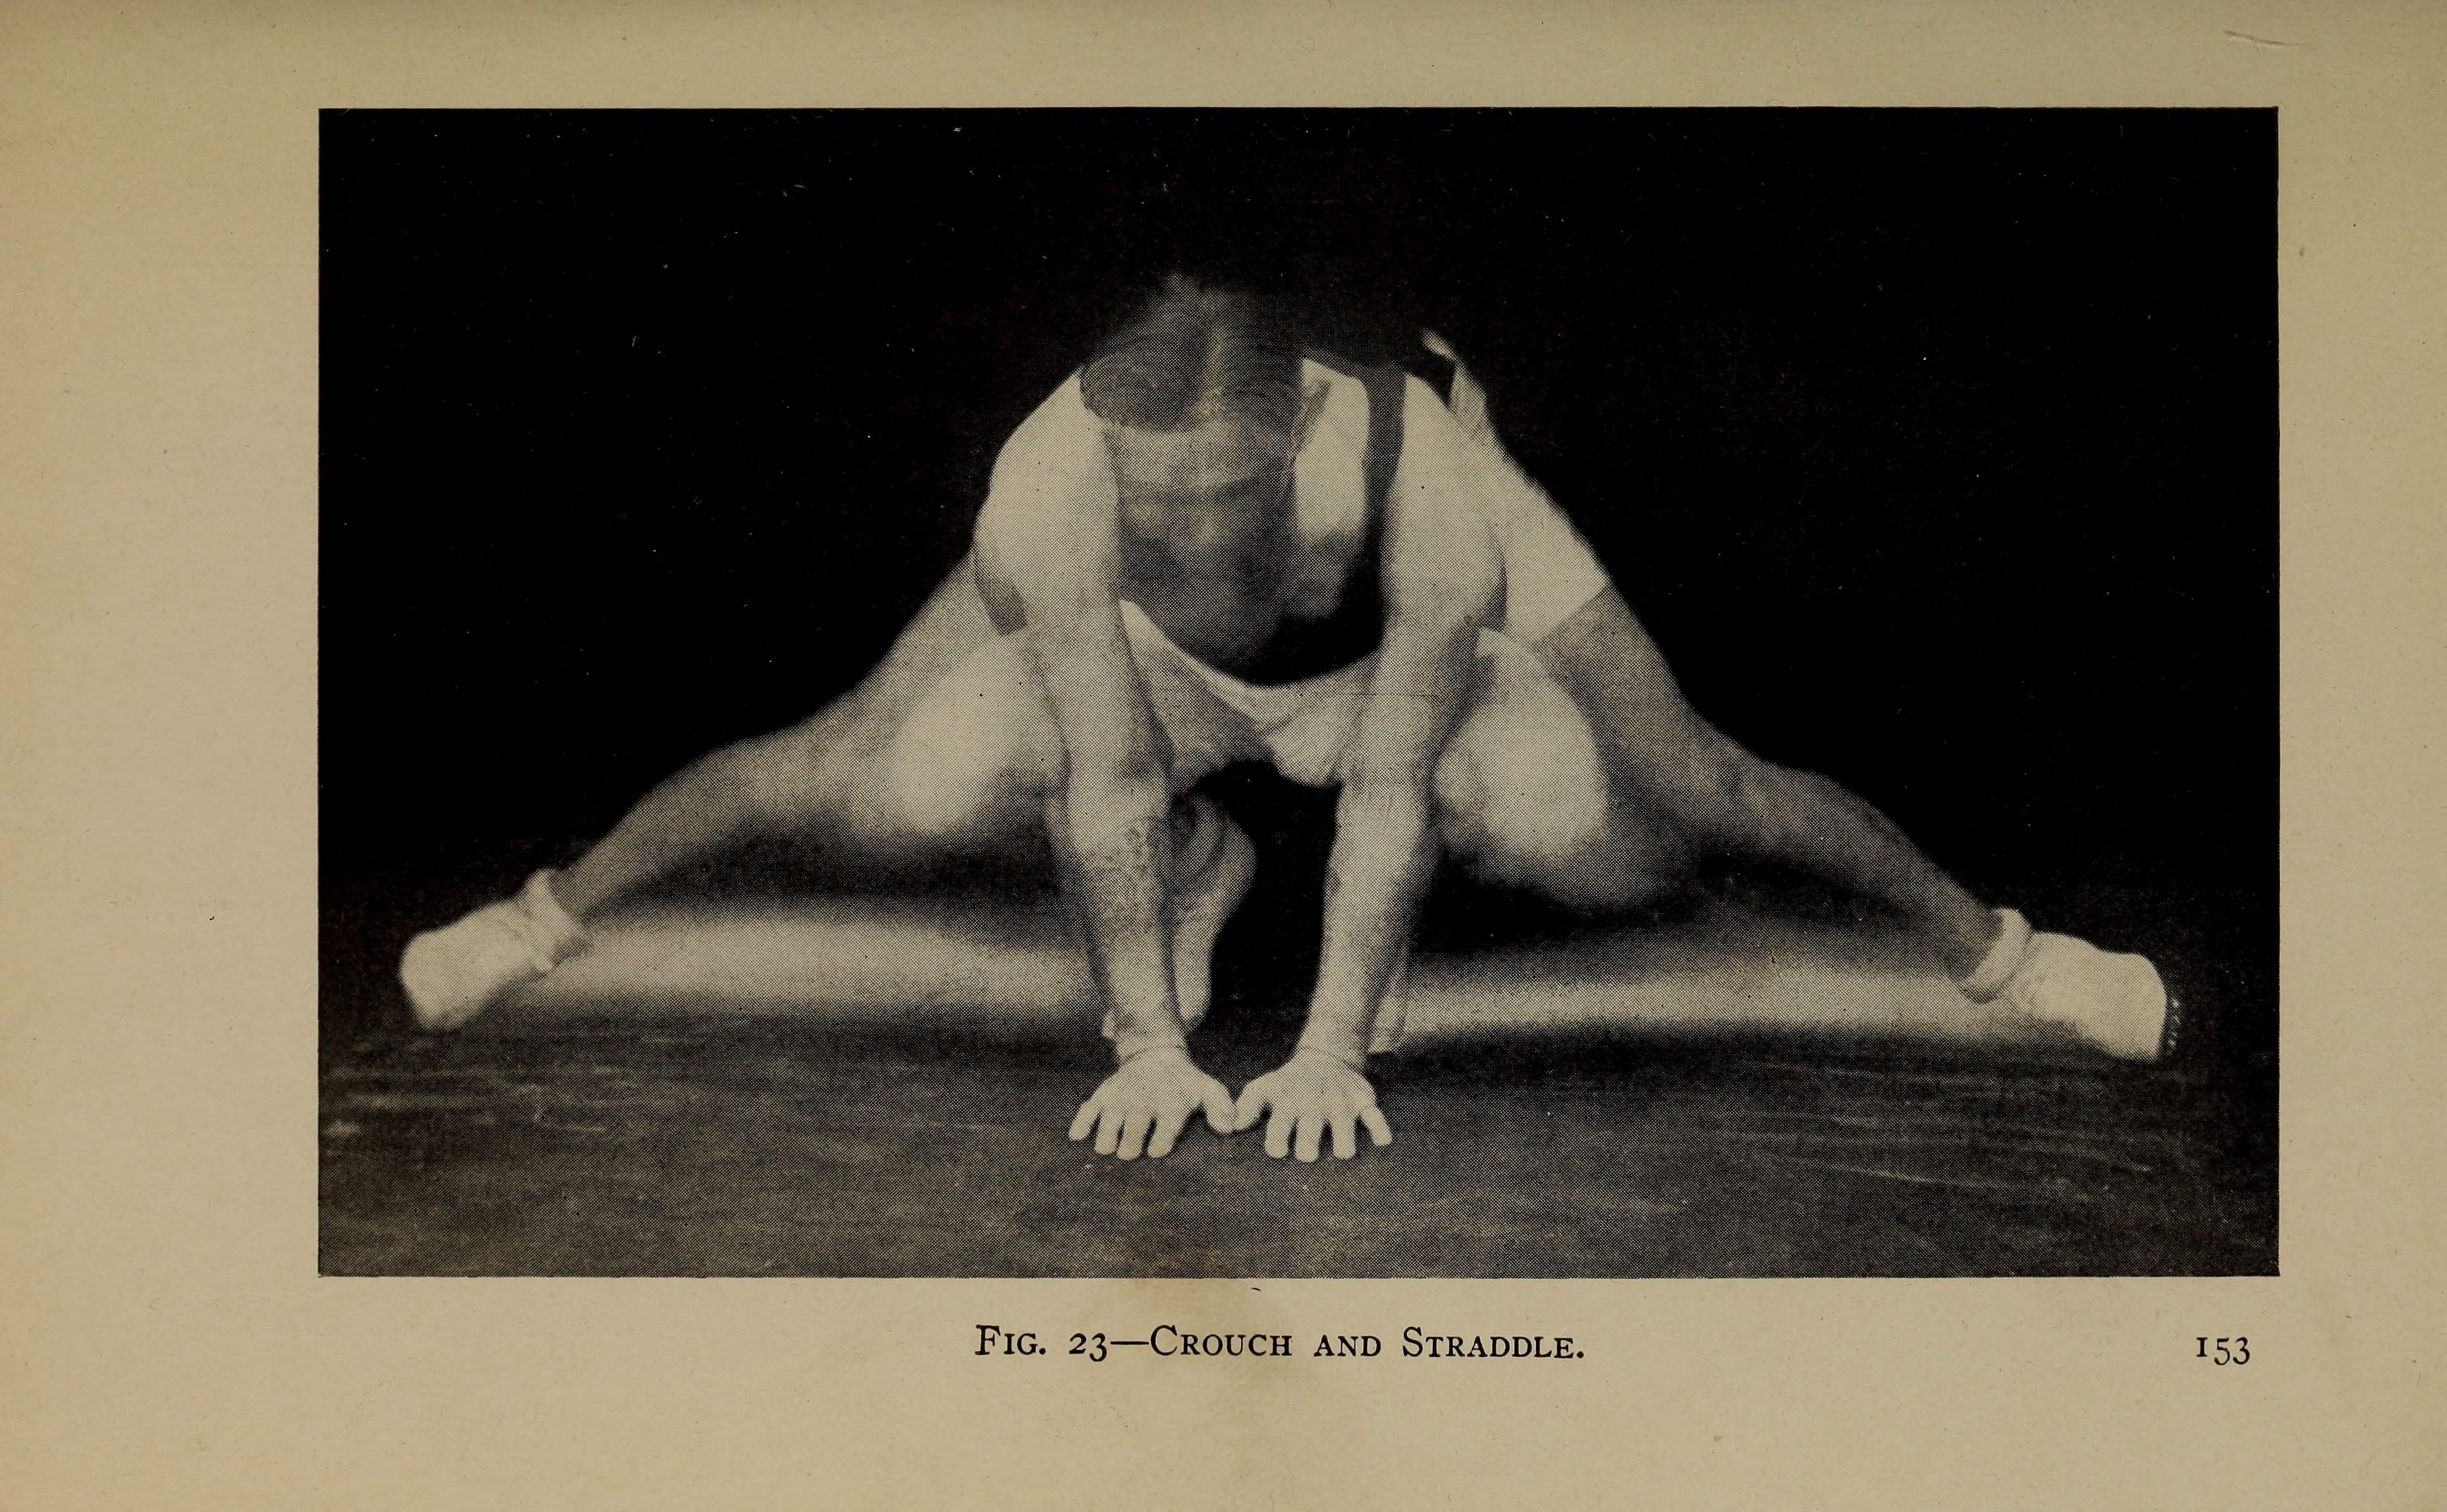 Physical training for business men; basic rules and simple exercises for gaining assured control of the physical self byHancock, Harrie Irving, 1868-1922 Publication date 1917